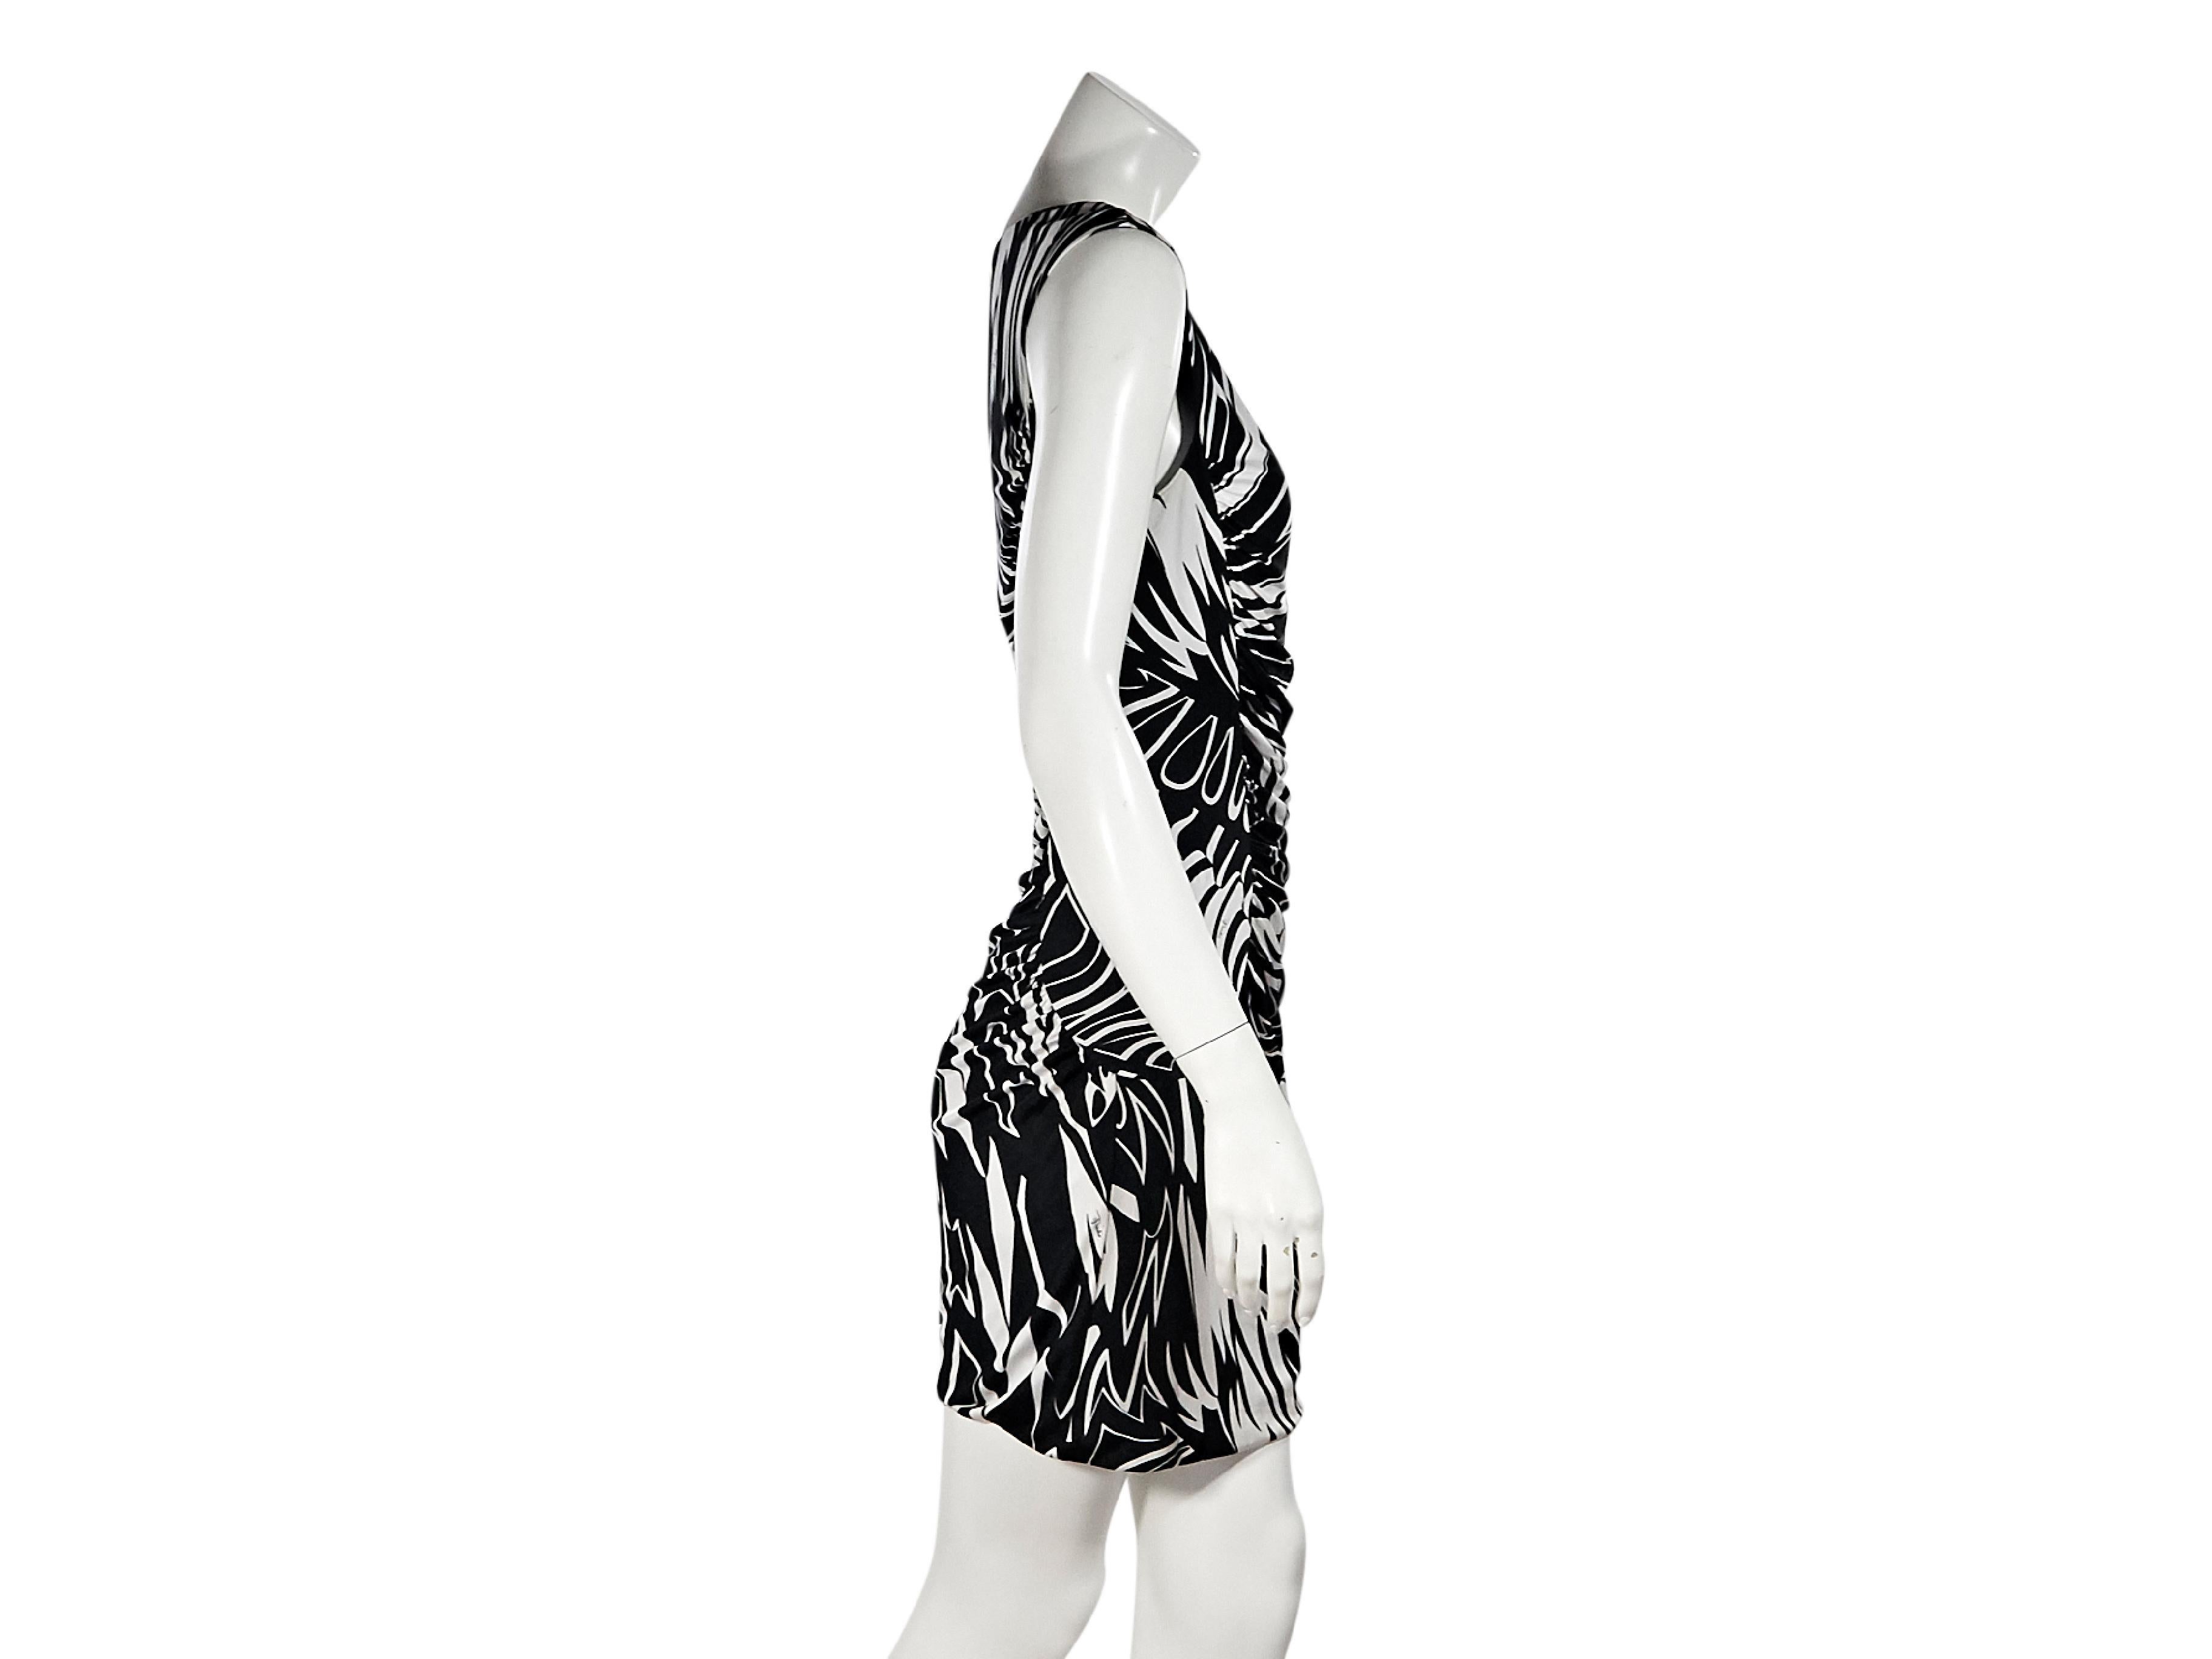 Product details:  Black and white printed jersey-knit mini dress by Emilio Pucci.  Scoopneck.  Cap sleeves.  Ruched design creates a flattering silhouette.  Pullover style.  32